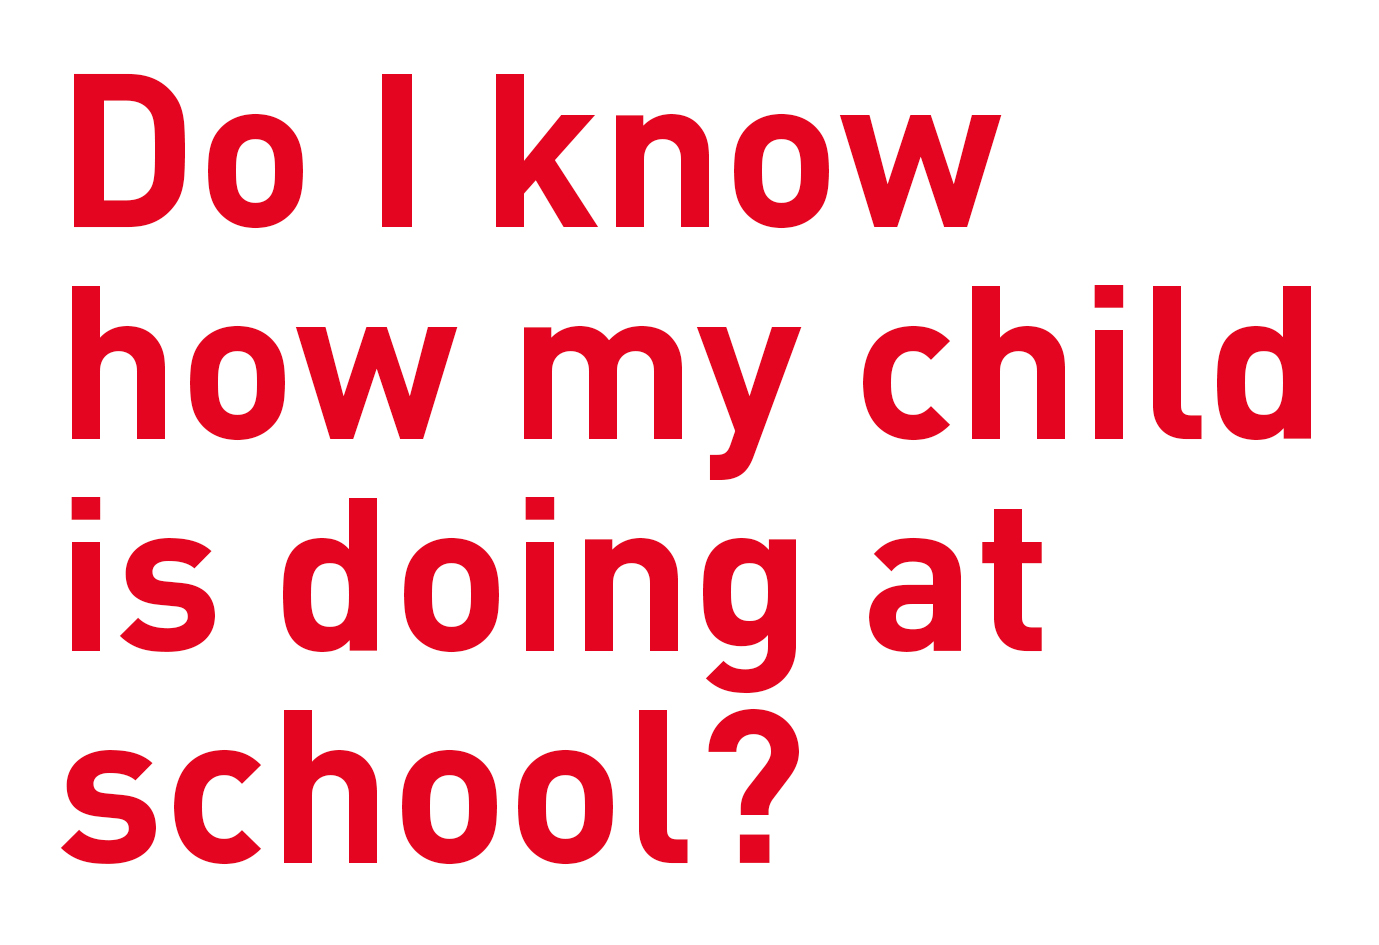 Do I know how my child is doing at school? - Lipschule